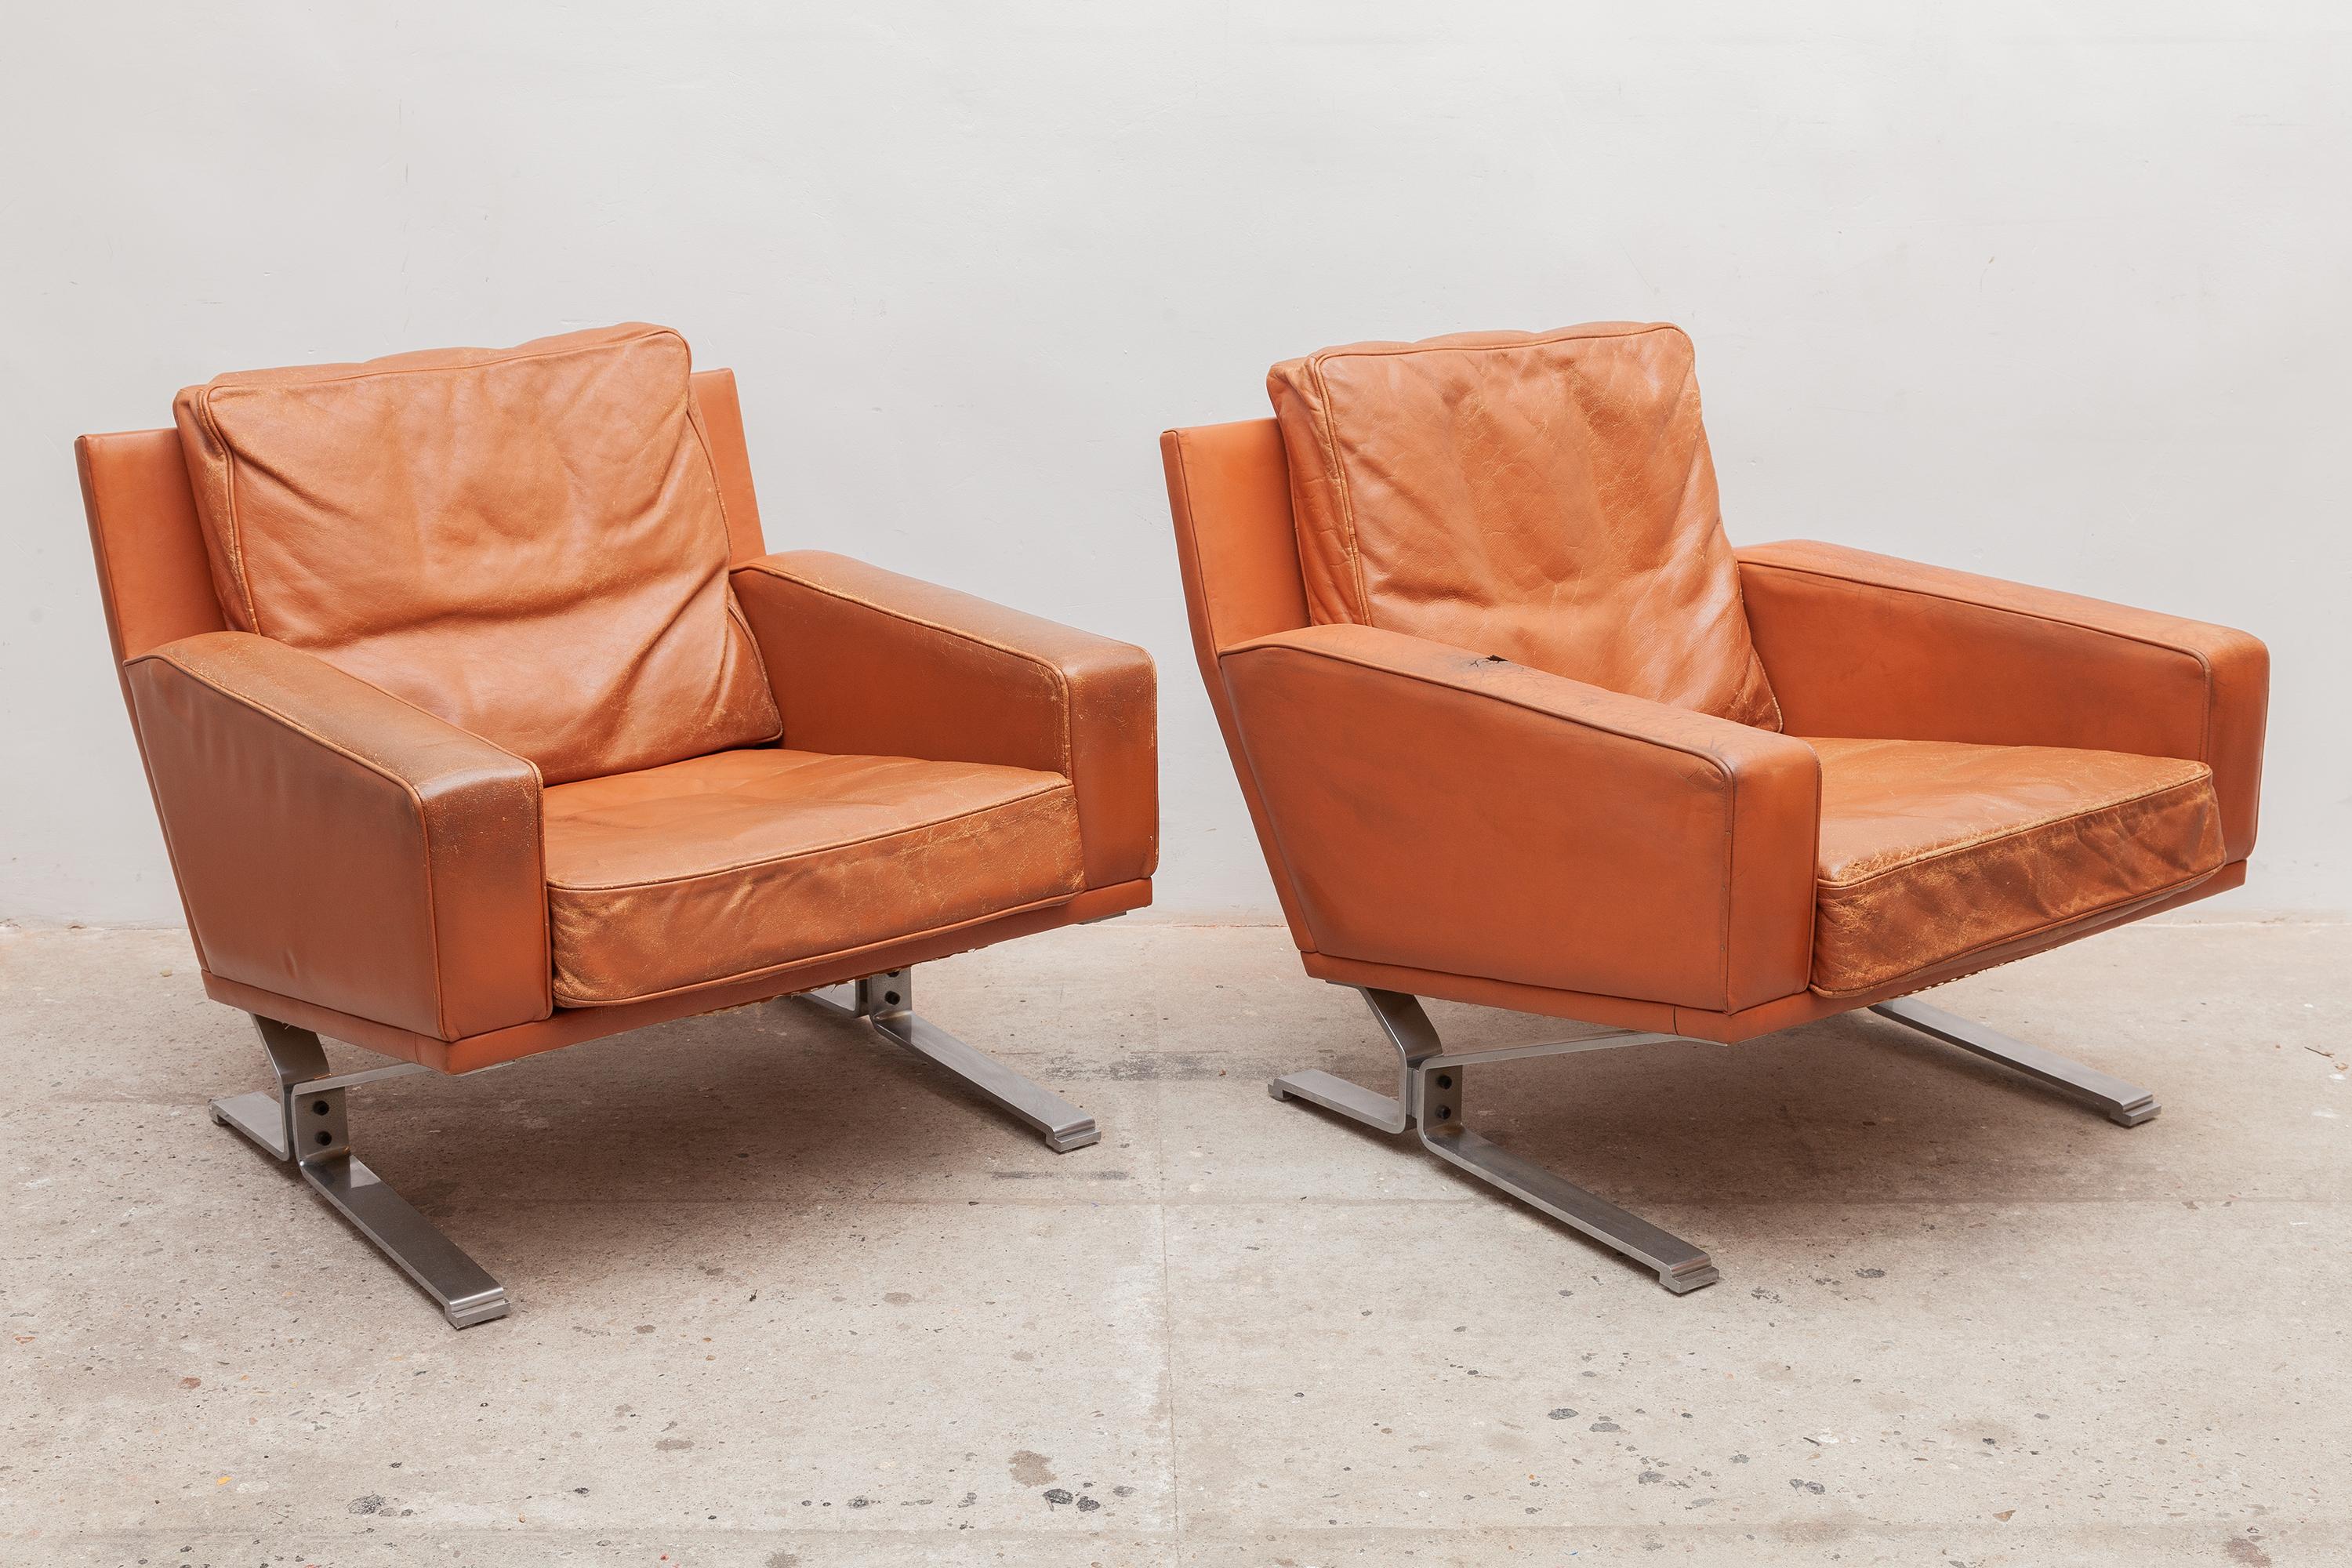 Vintage midcentury very nice club chairs. Patinated cognac leather. Wide comfortable seat and armrests. These high quality chairs are made of a massive stainless steel base.
Good nice patina to the leather, signs of wear and age but not rips.